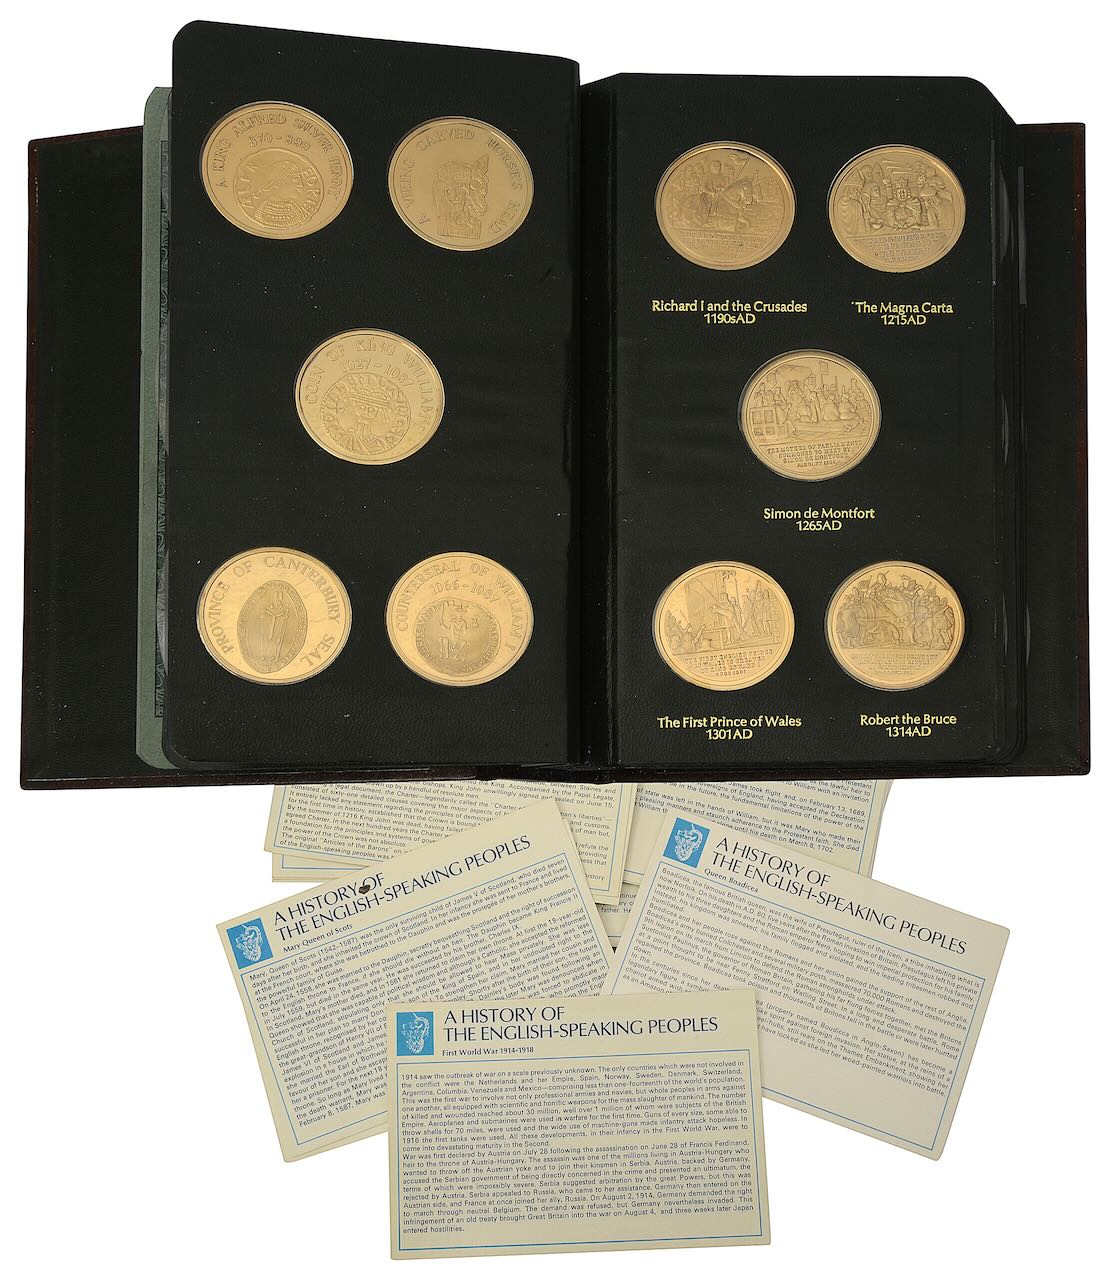 A History of the English-Speaking Peoples. A set of 50 22ct gold plated silver medals